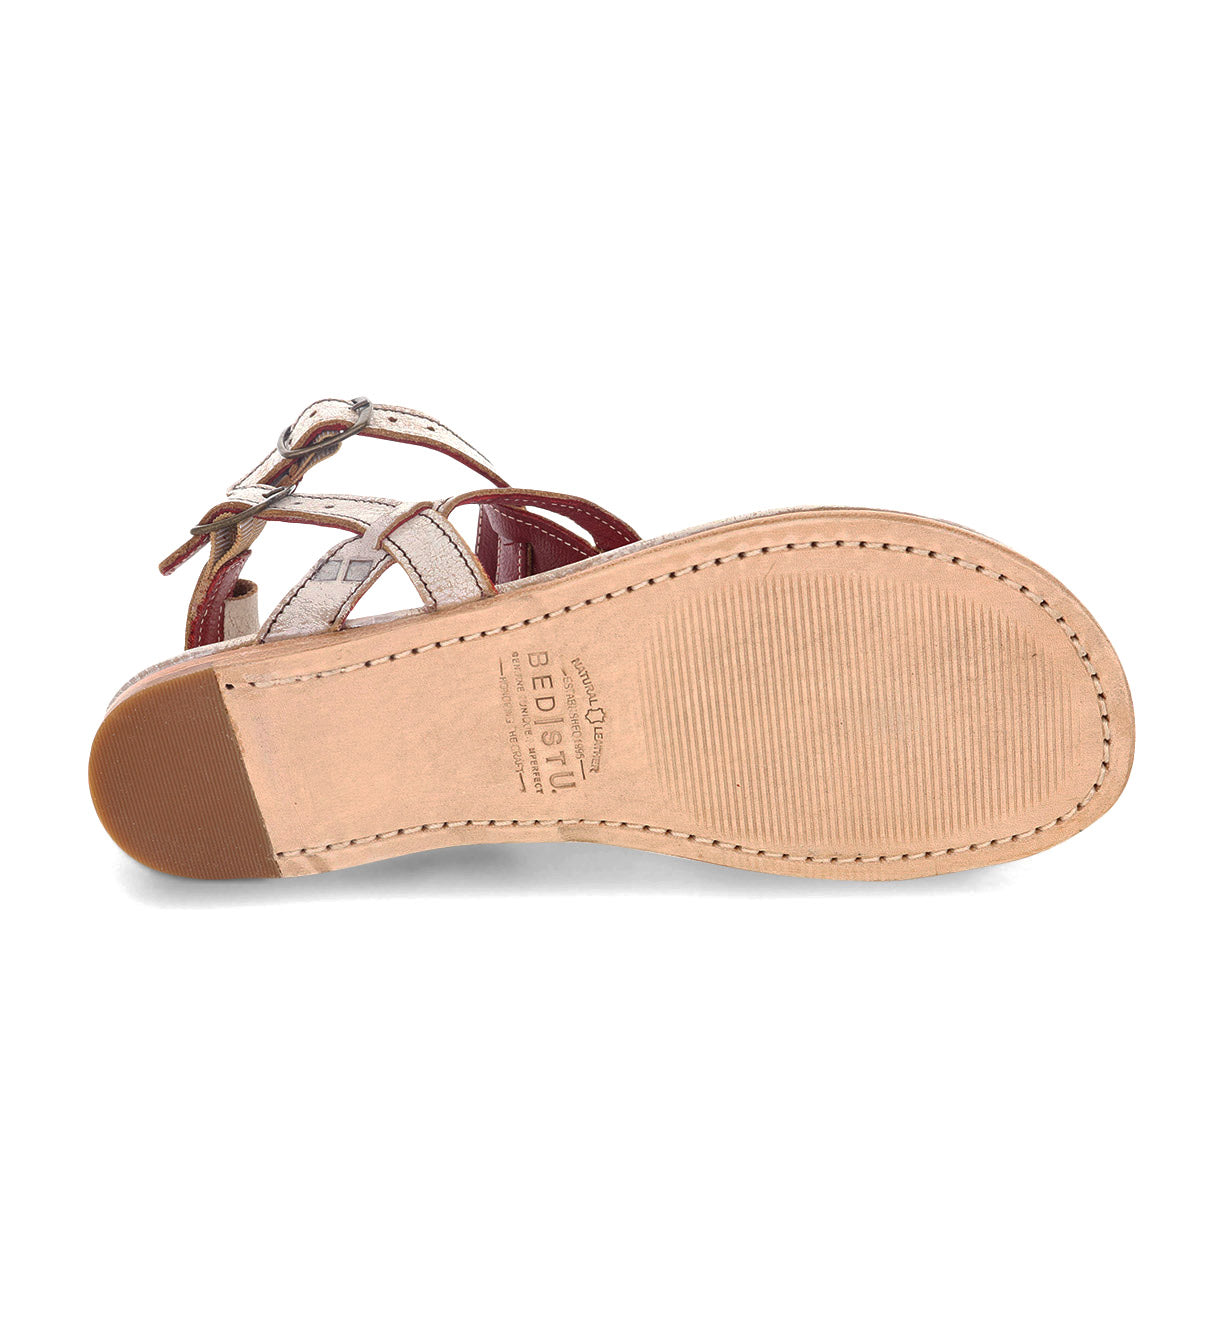 A pair of women's Moon sandals by Bed Stu with straps and buckles.